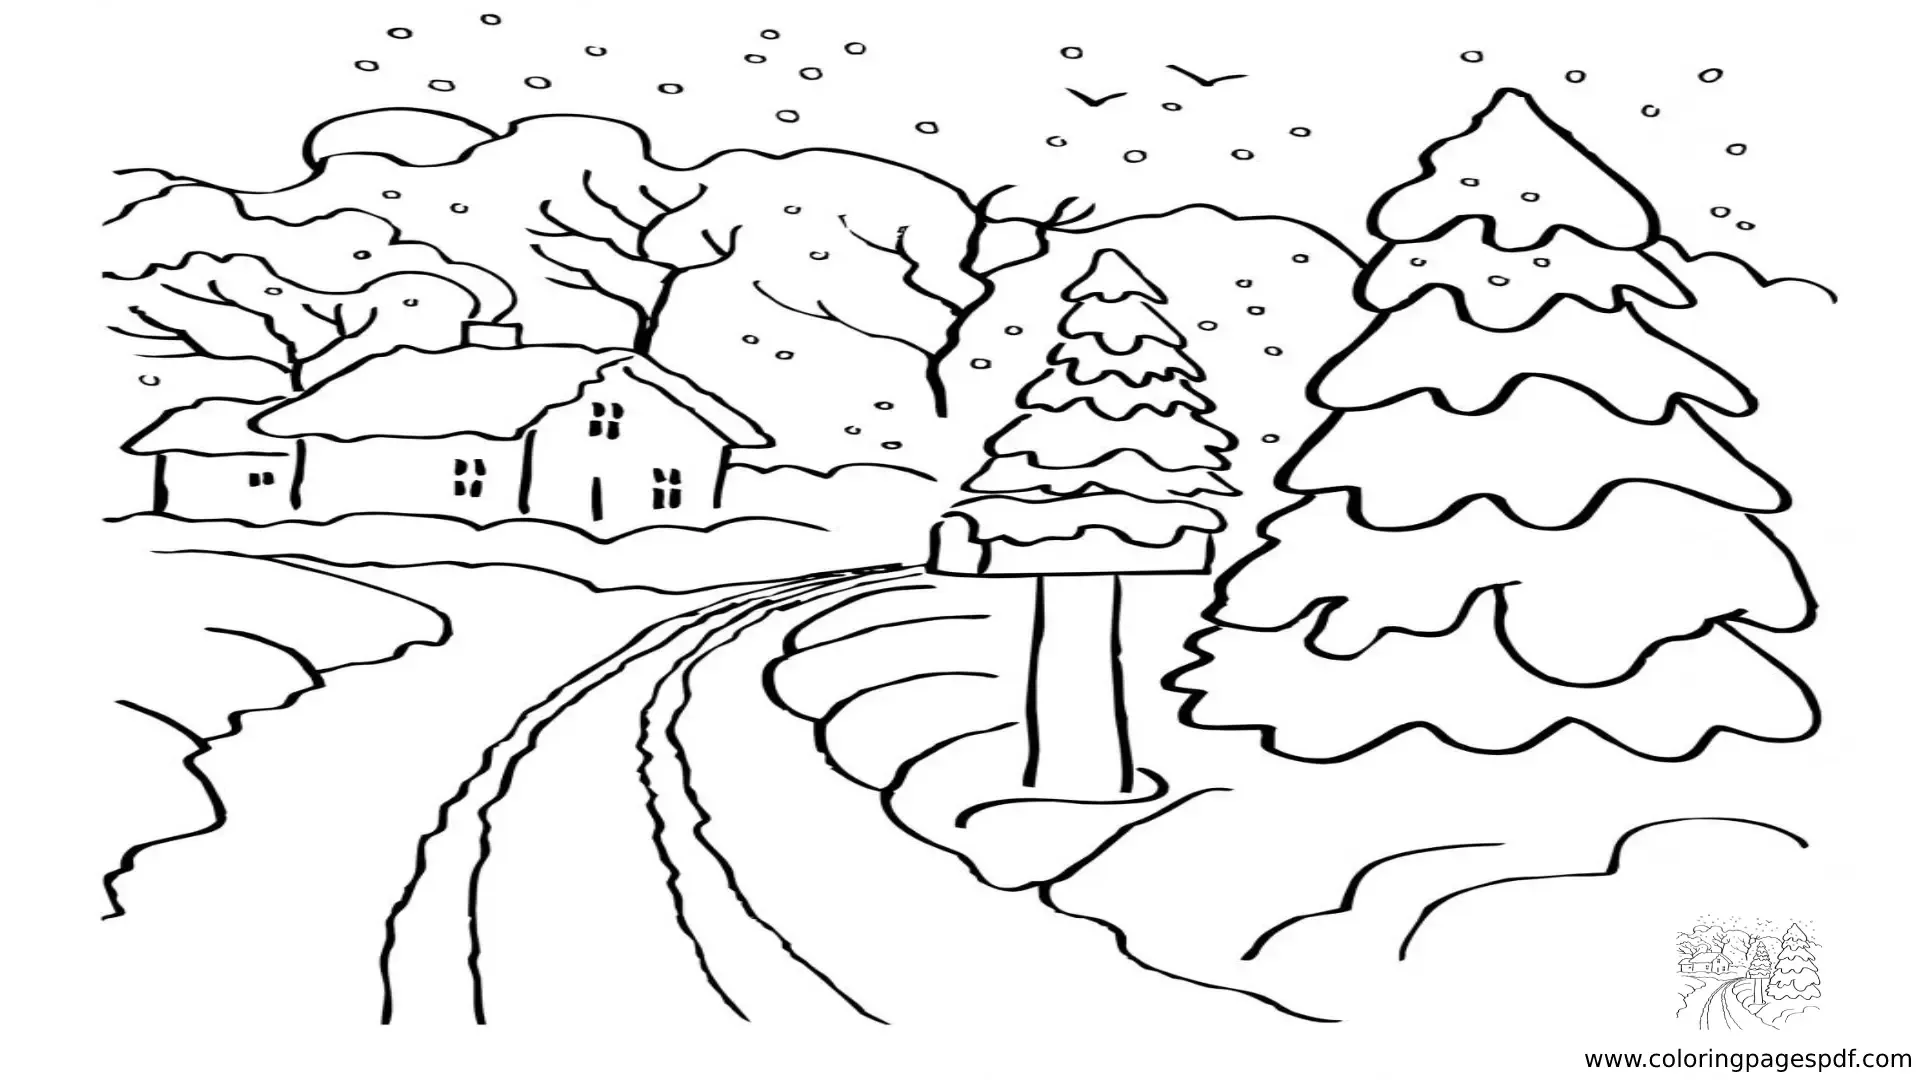 Coloring Pages Of A Snowy Road